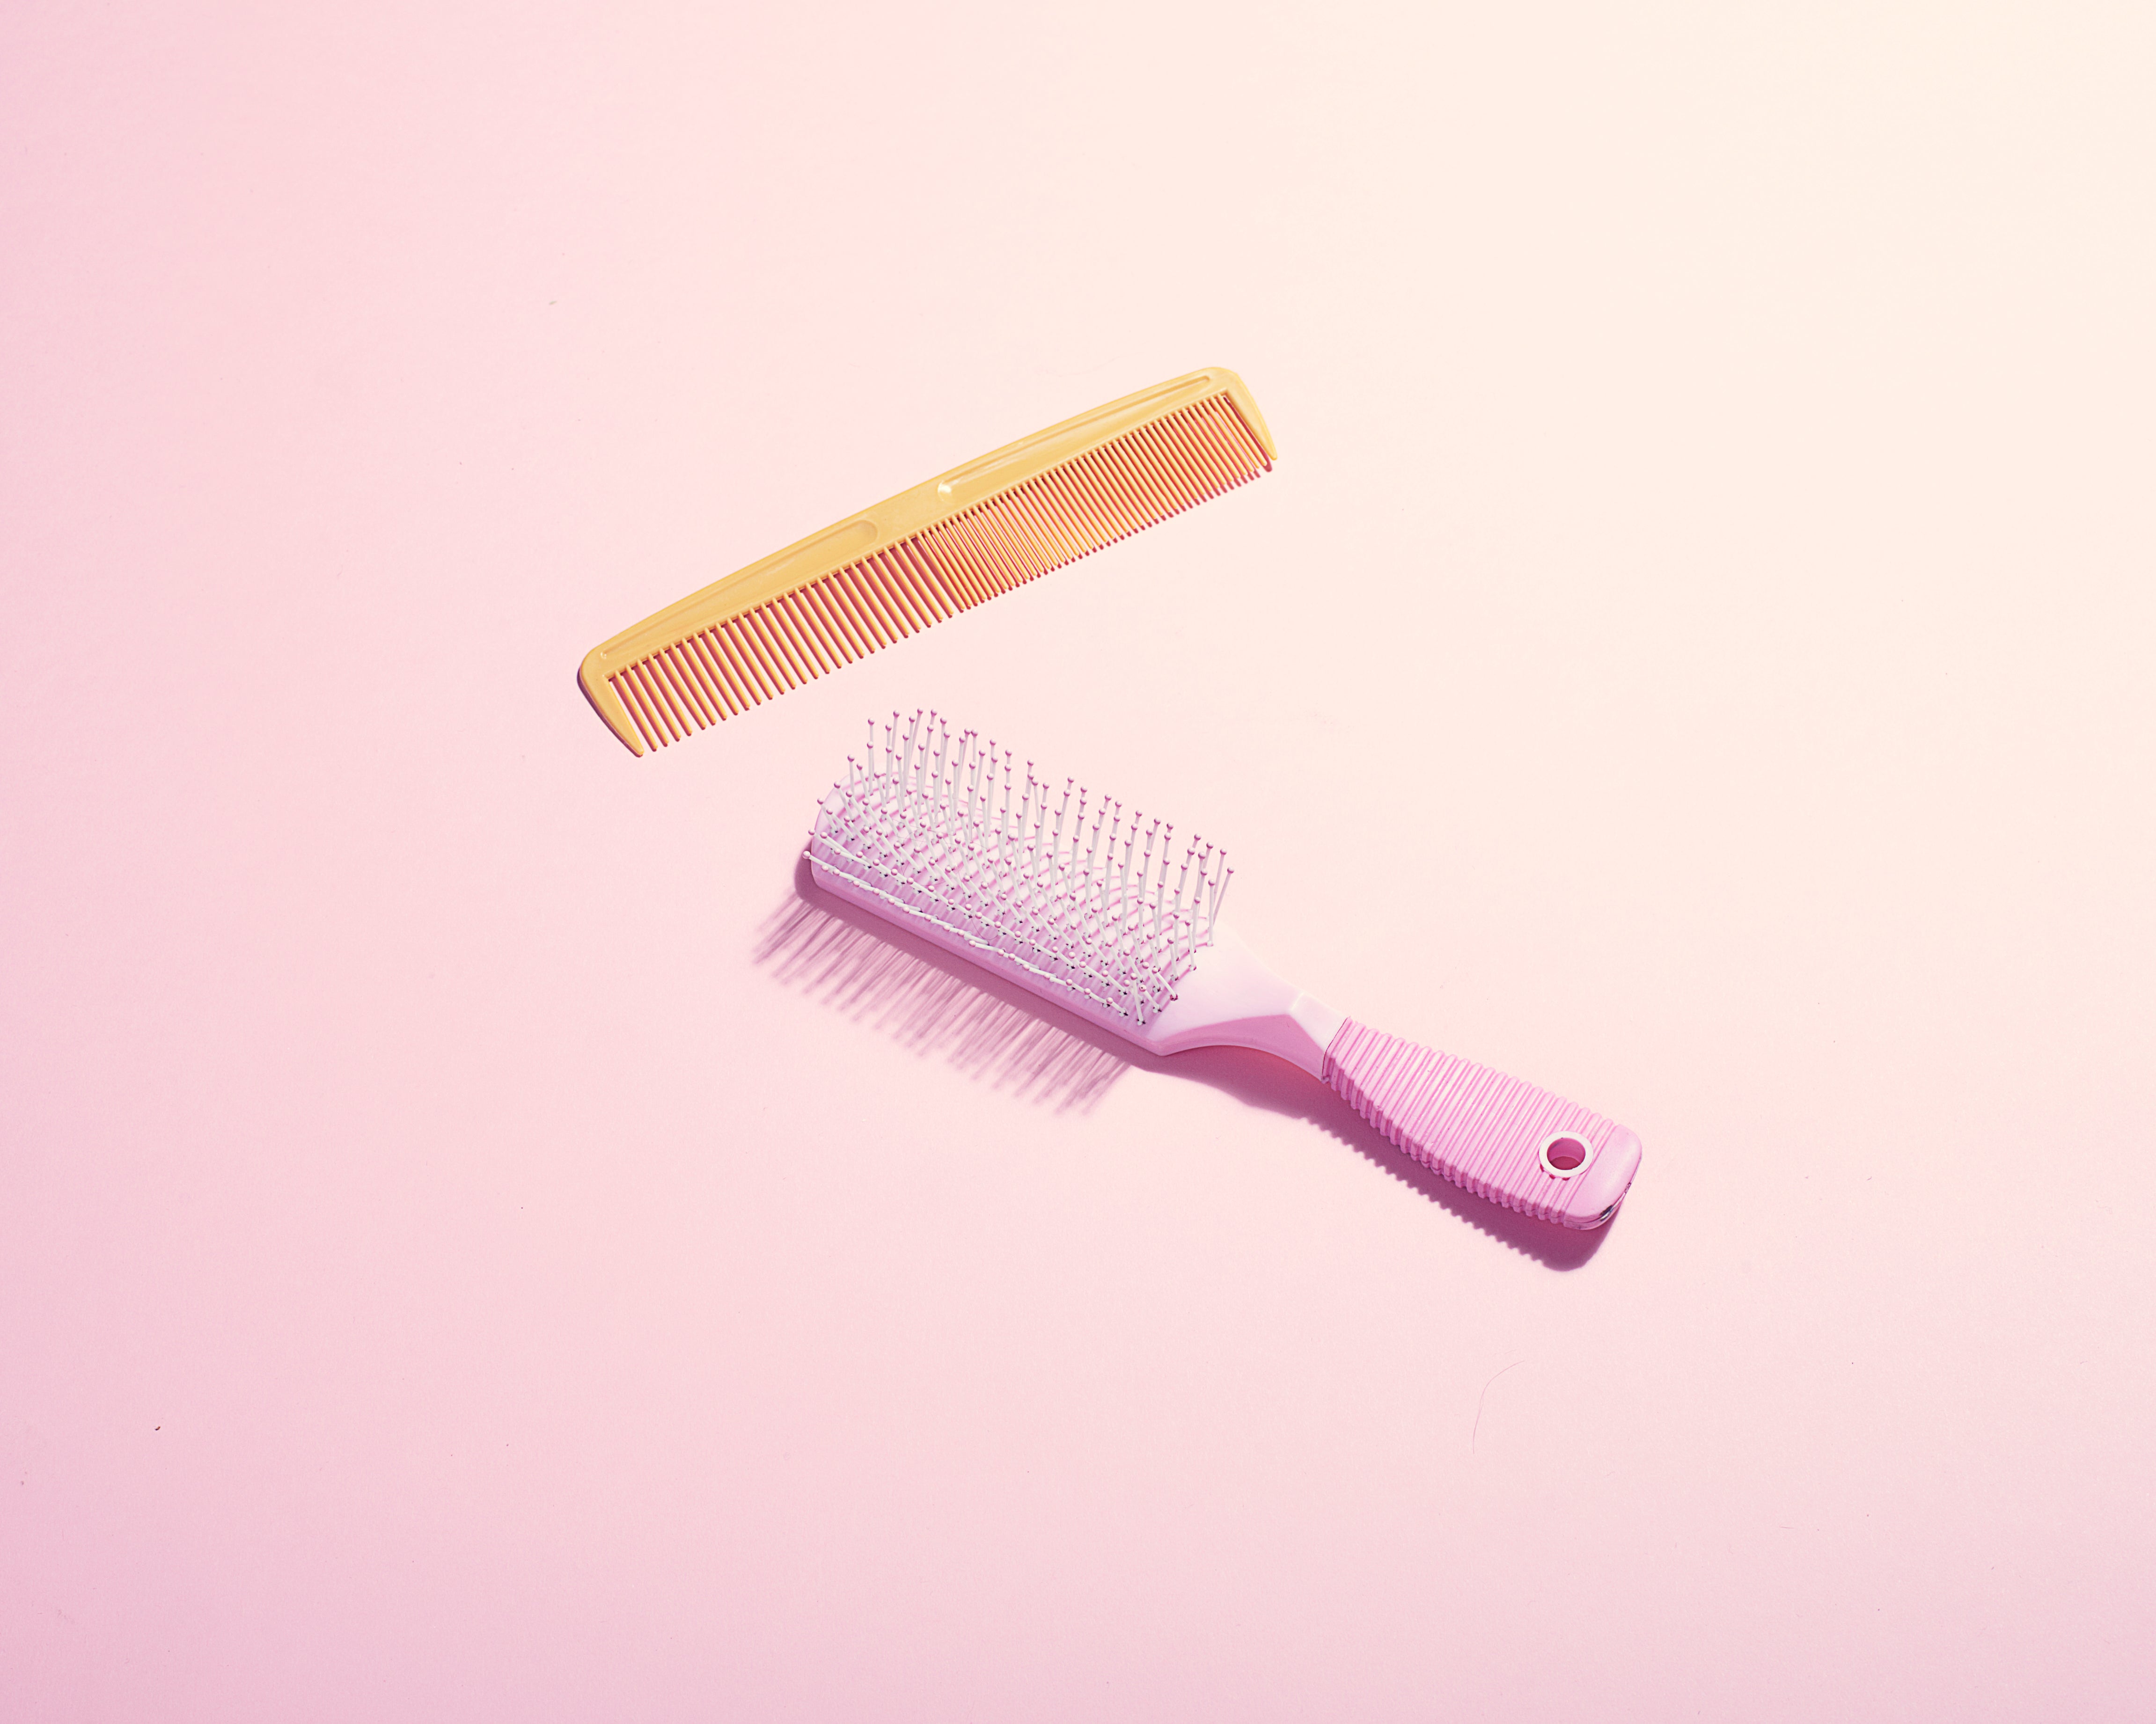 Here's Everything You Need to Know About Cleaning Your Hair Tools